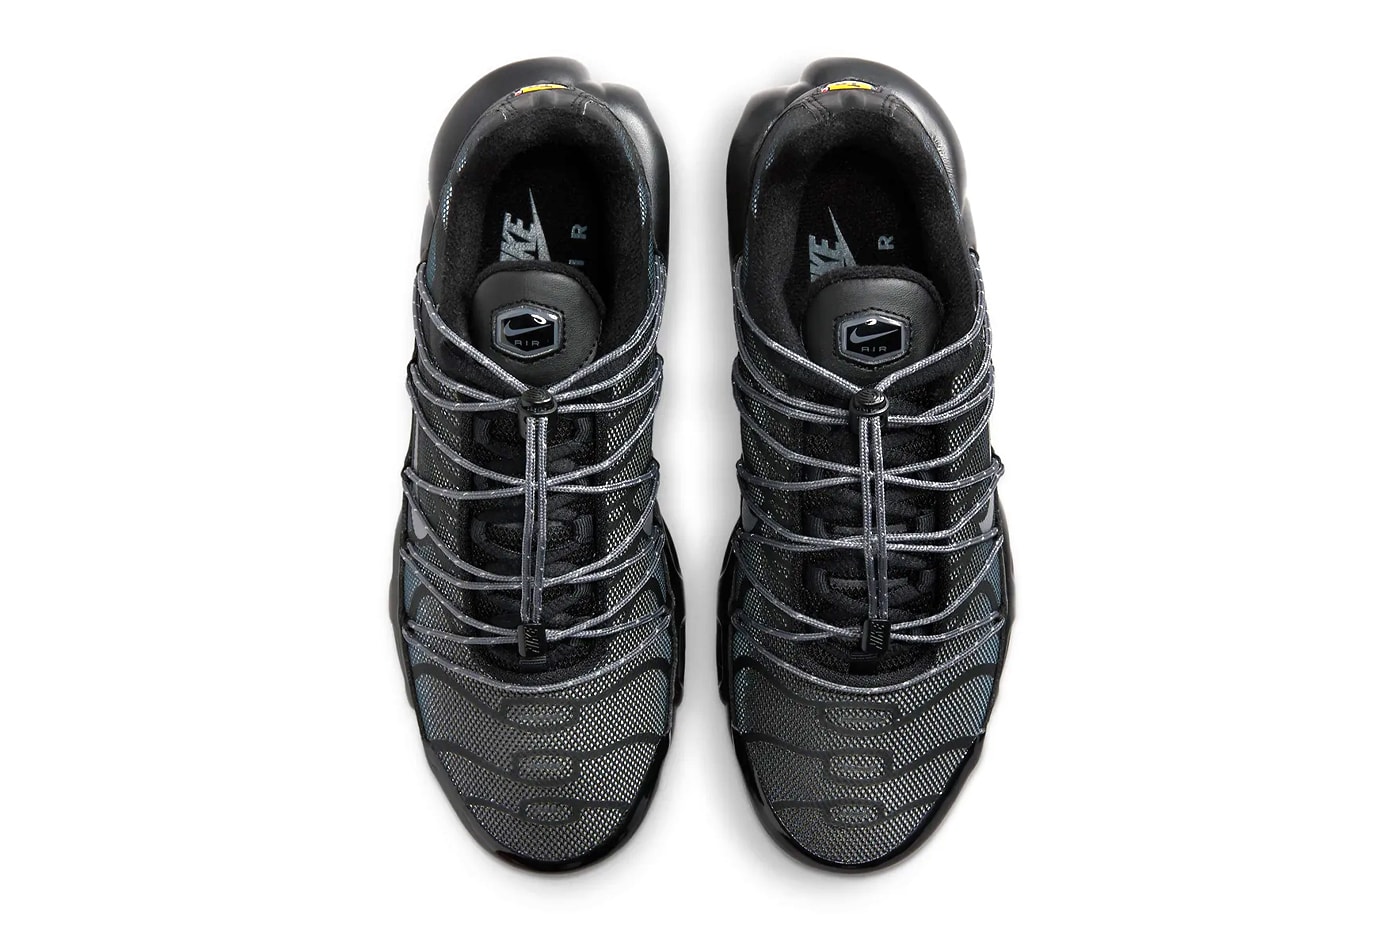 Nike Air Max Plus Toggle Laces "Black/Metallic Silver" FZ2770-001 nike technical sneakers everyday swoosh